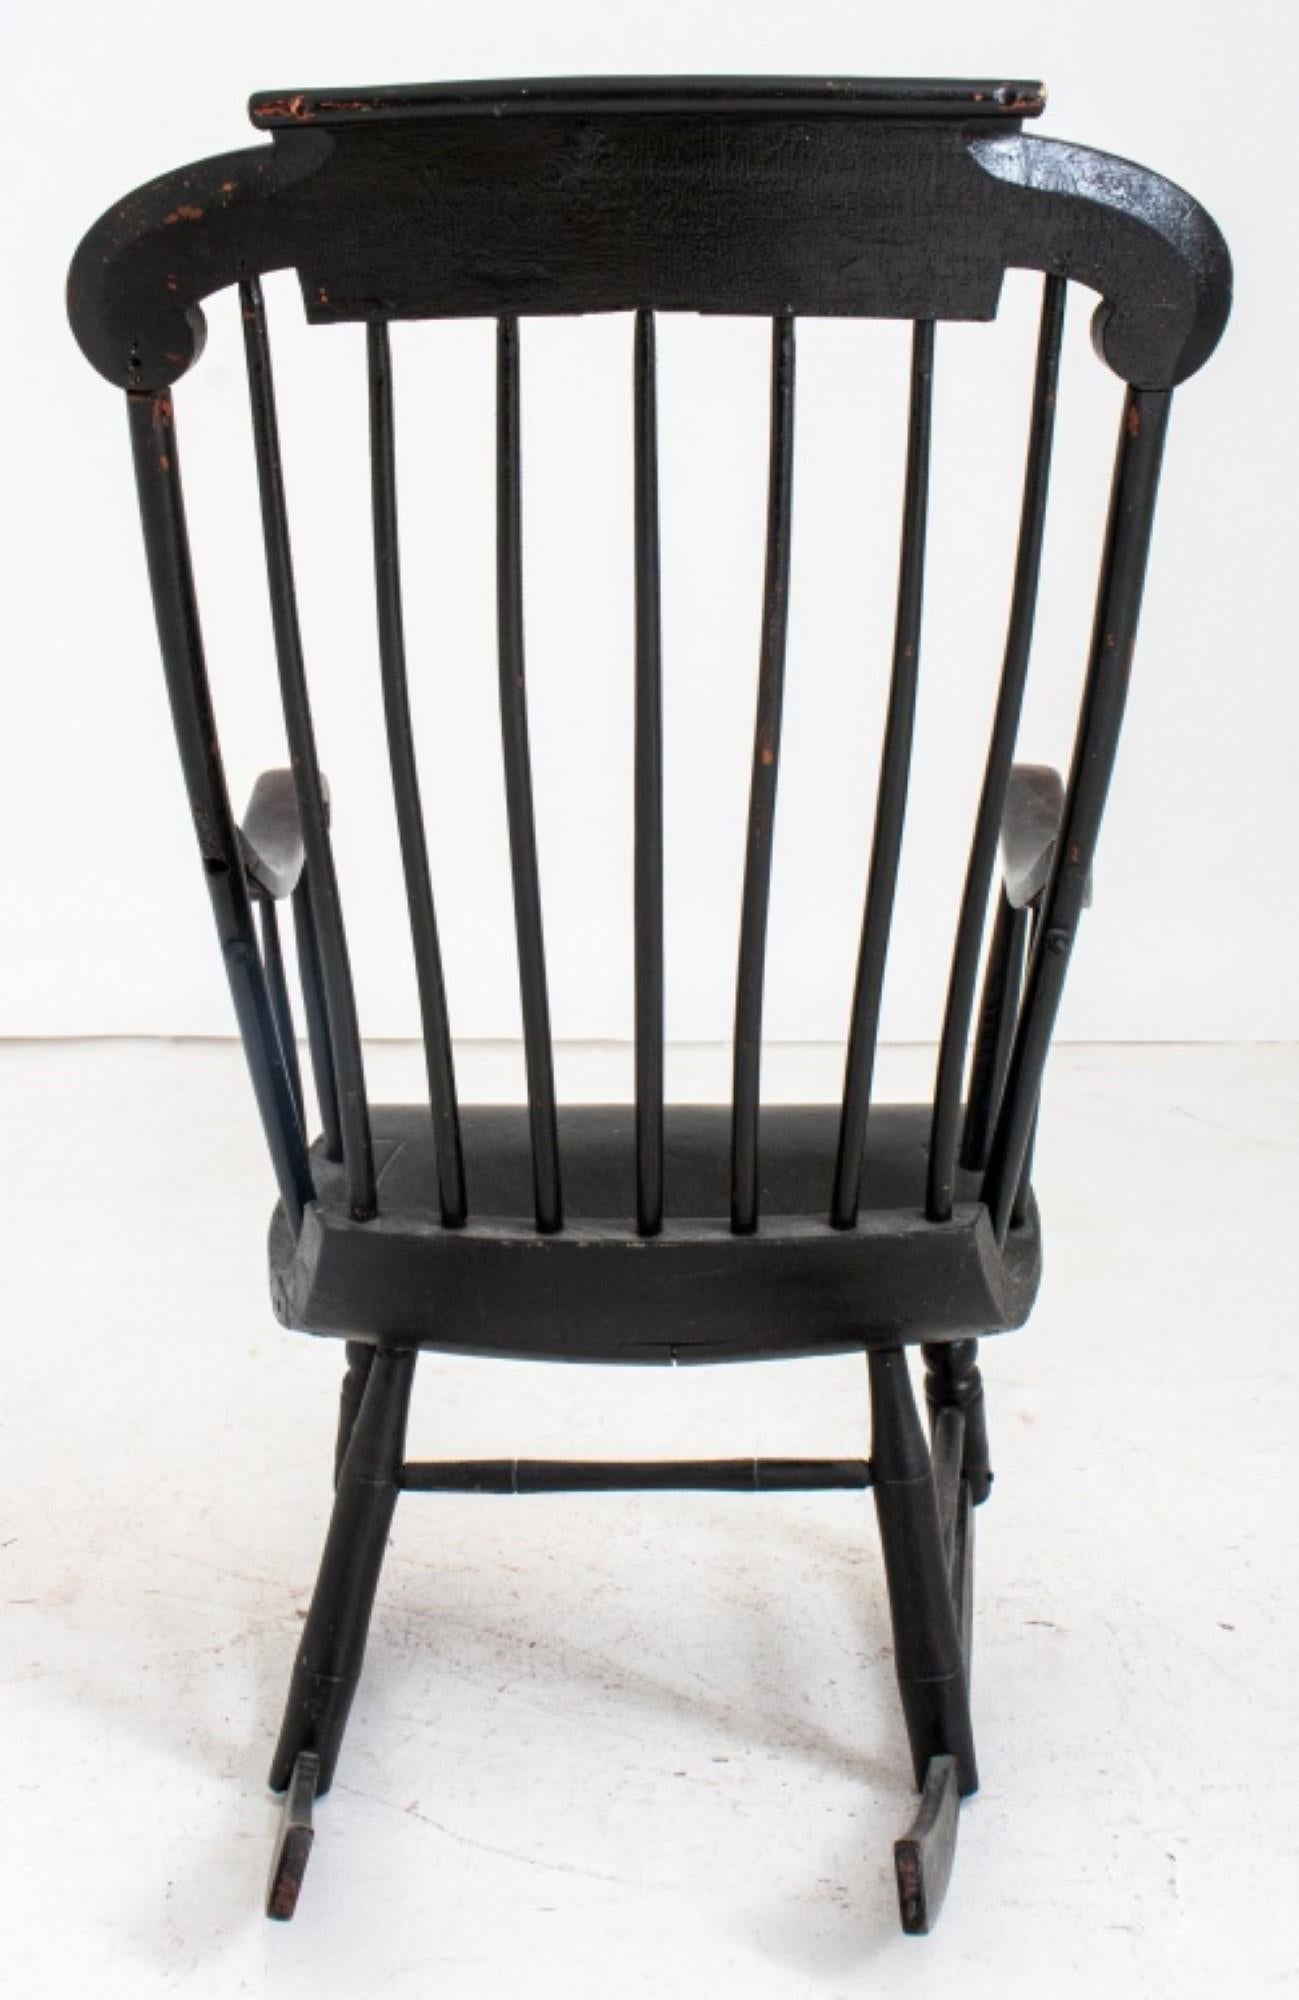 American black milk-painted rocking chair, likely from the 19th century. Here are the details:

Style: American, 19th Century
Finish: Black milk-painted
Features:
Shaped crestrail
Turned rod stringing
Shaped conforming rectangular seat
Turned